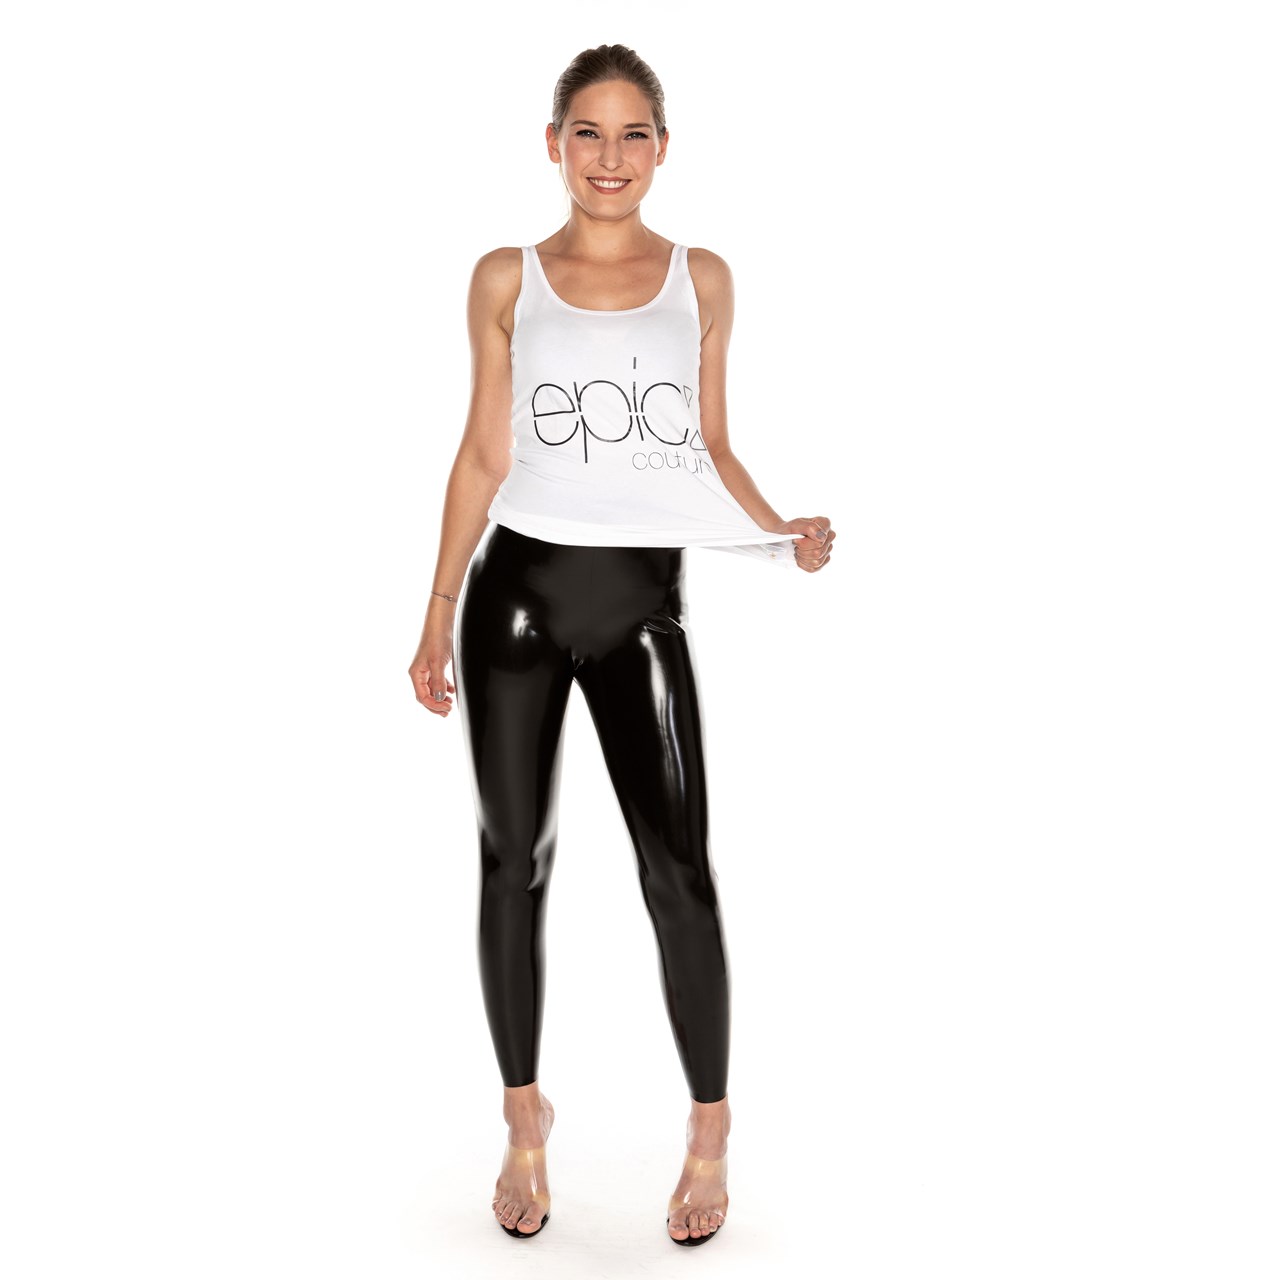 epic-couture Produkt-Beispiele LATEX LEGGINGS